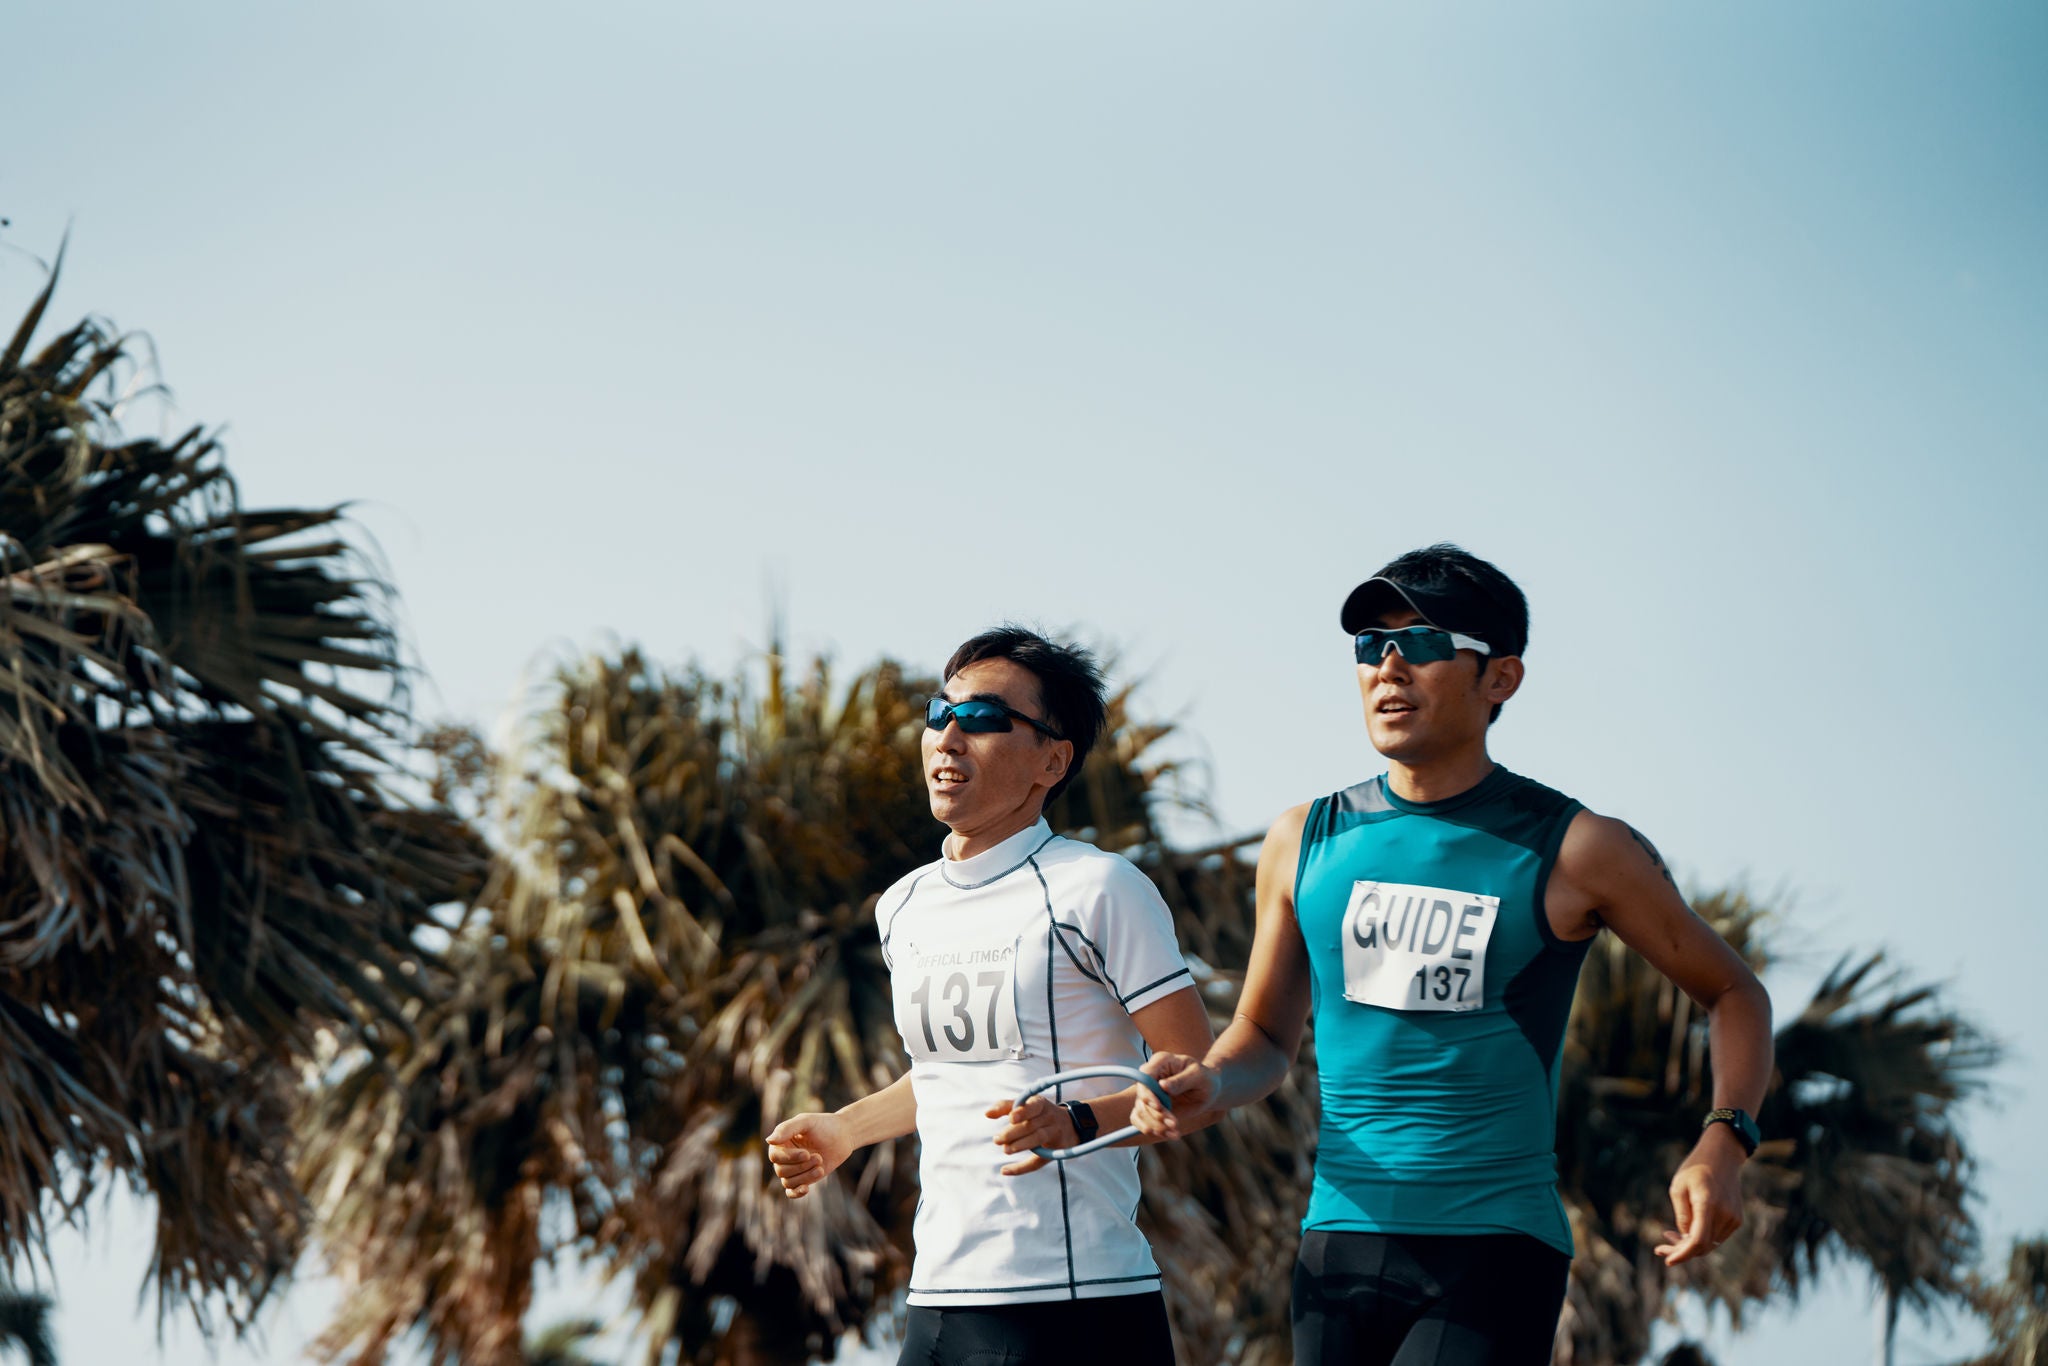 Blind triathlete running and training with his guide